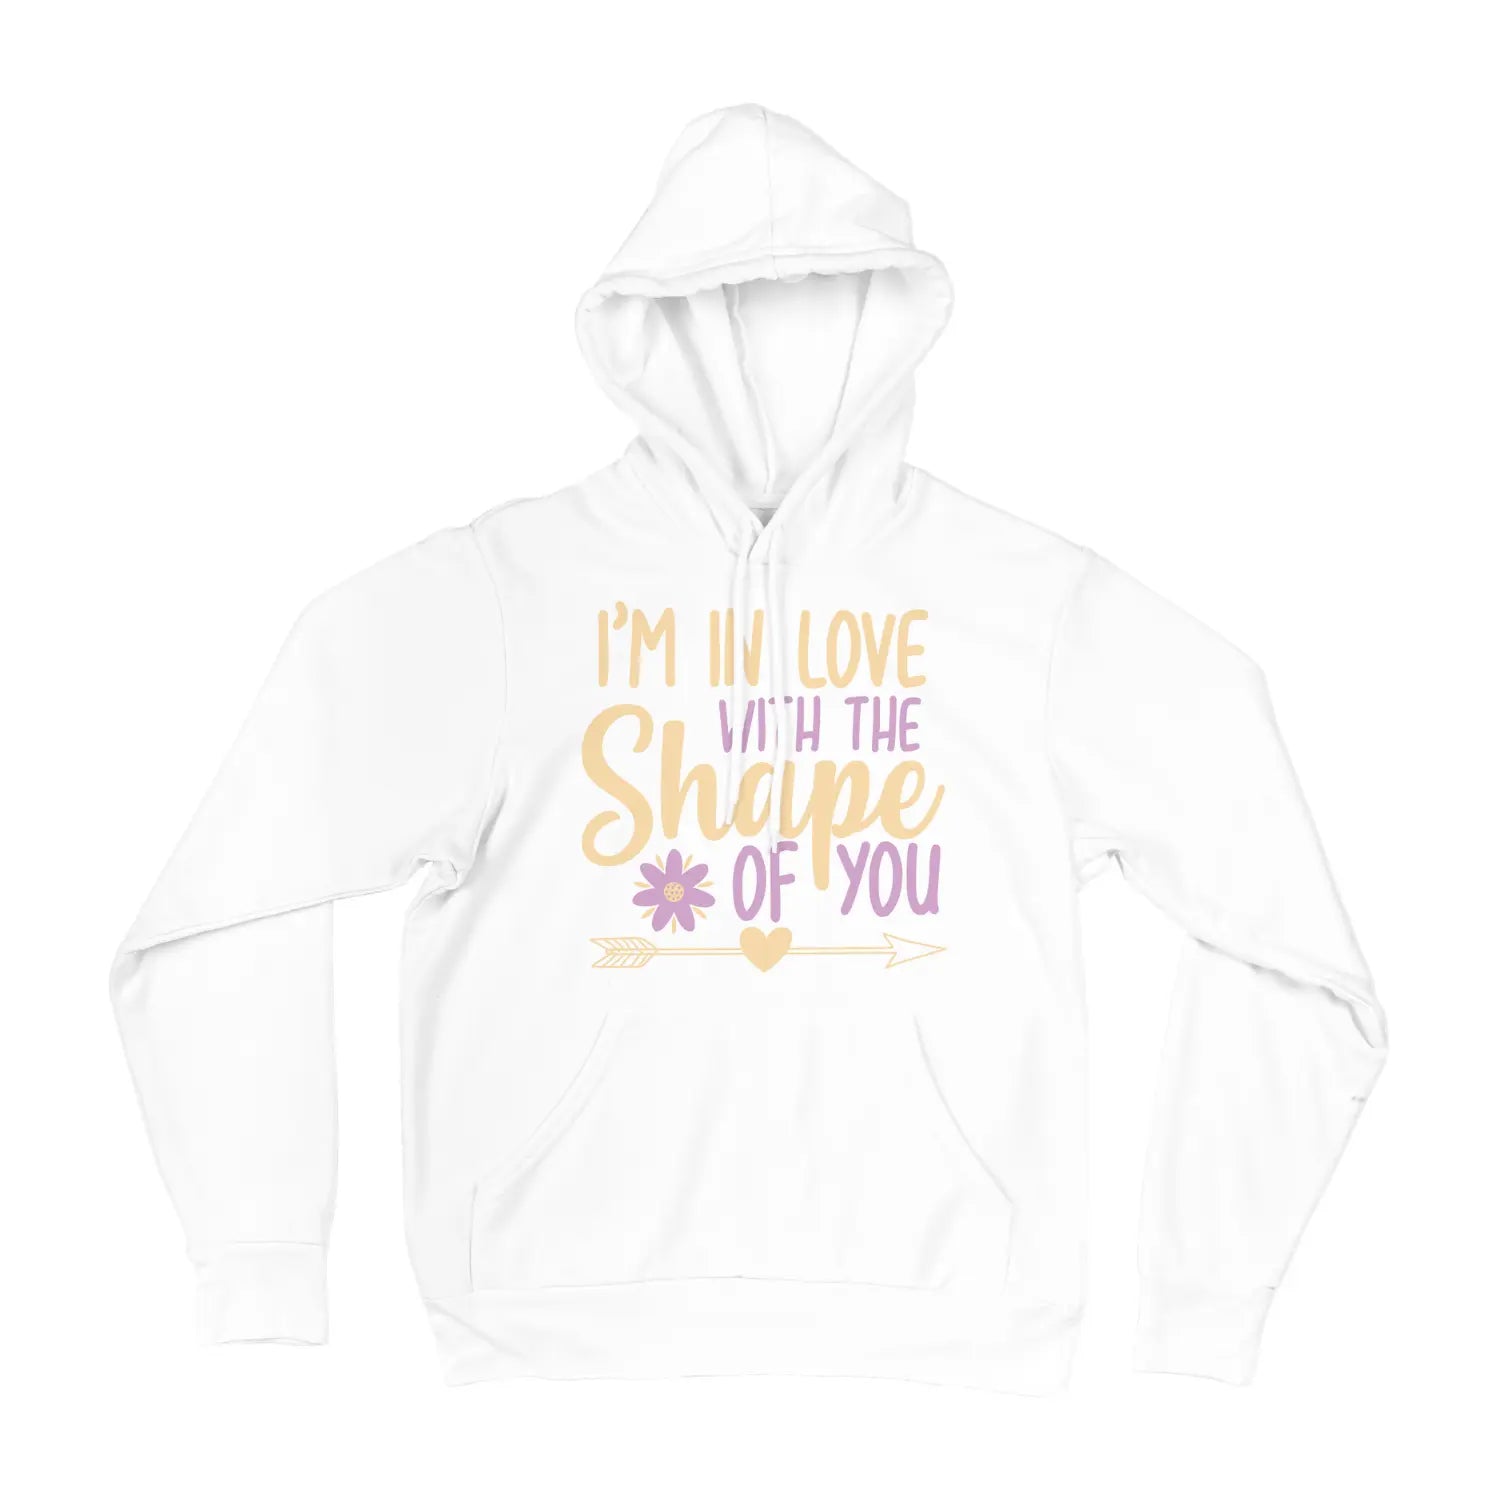 Im in love with the shape of you SVG | Digital Download | Cut File | SVG Only The Sweet Stuff